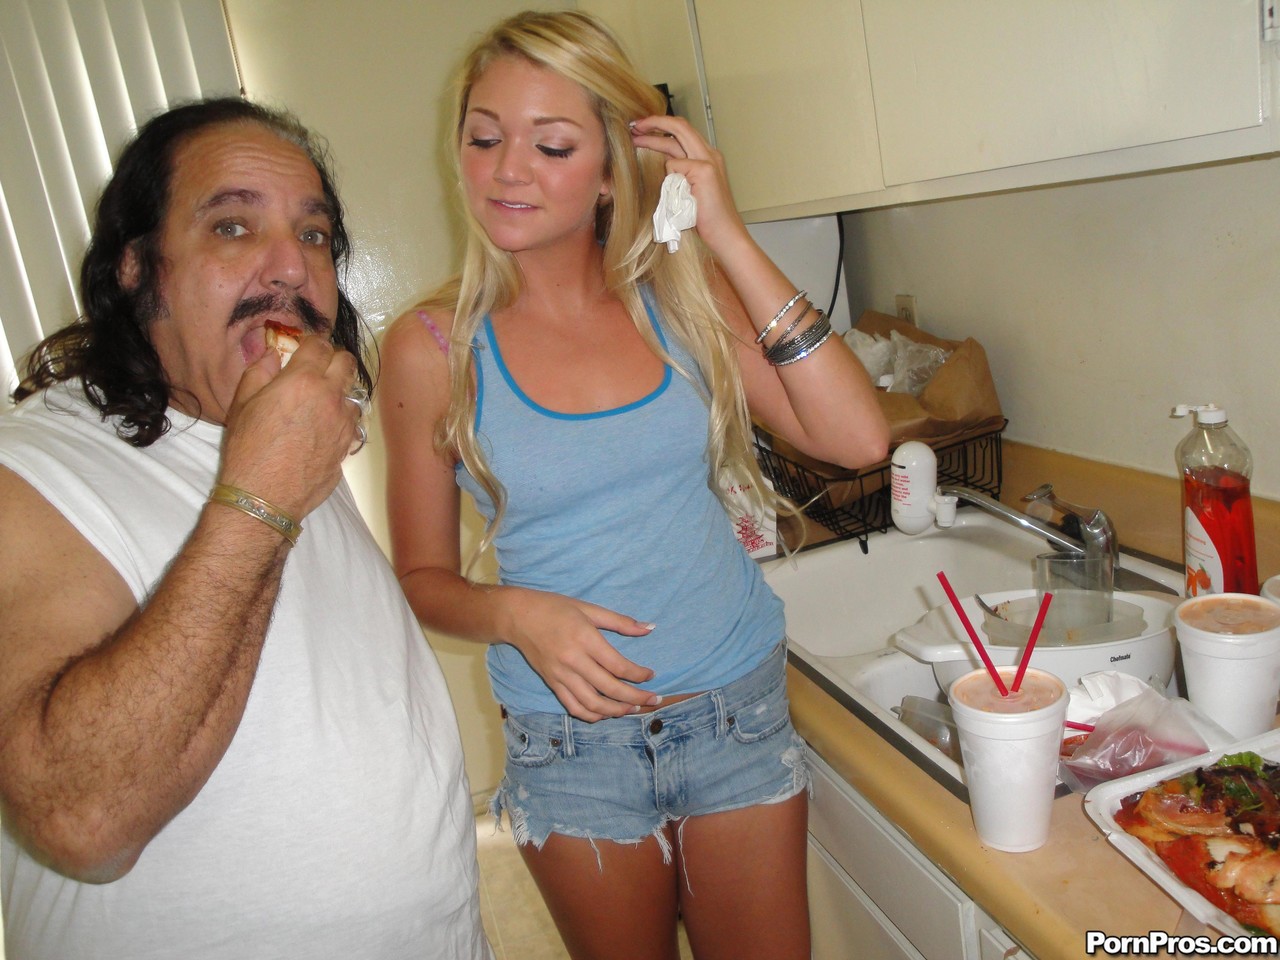 Sweet young blonde Jessie Andrews swallowing and riding an old man's cock 色情照片 #422620478 | Porn Pros Network Pics, Jessie Andrews, Ron Jeremy, Blonde, 手机色情